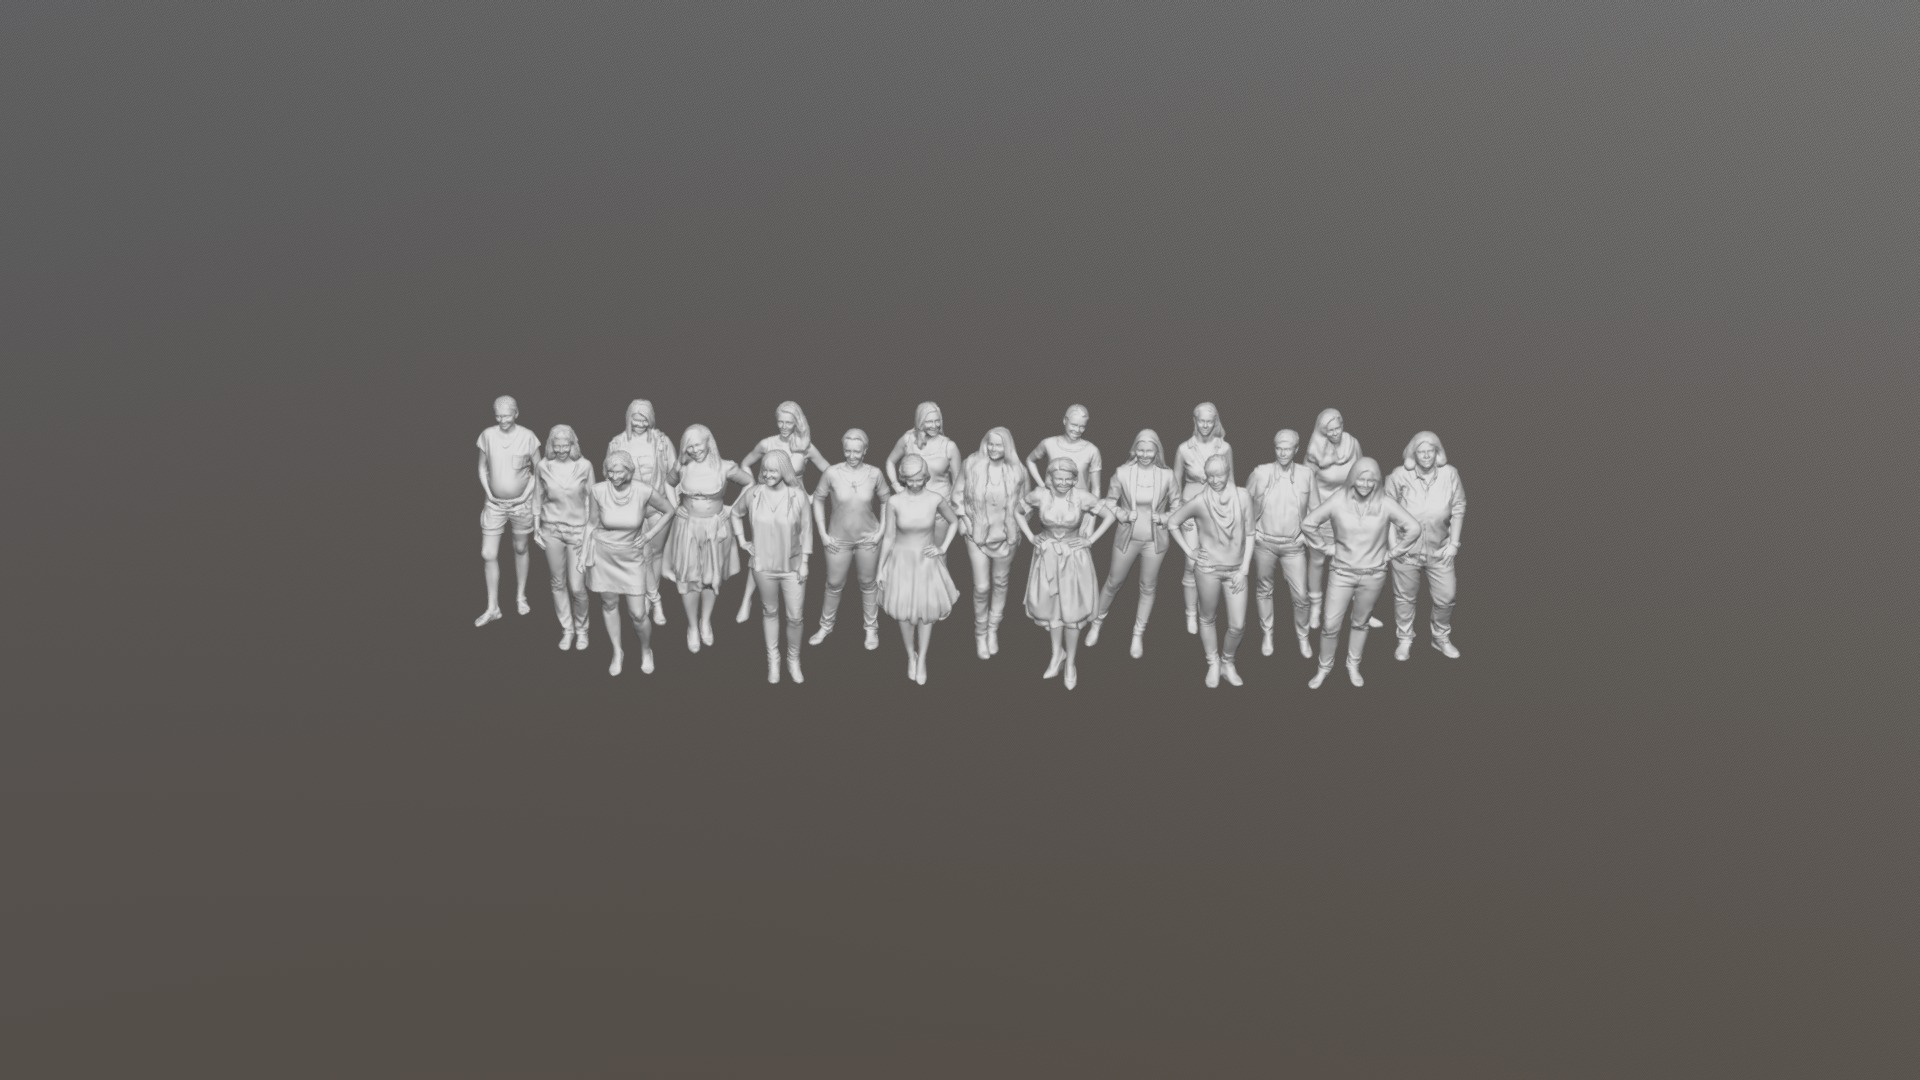 3D model Women-Package 1 - This is a 3D model of the Women-Package 1. The 3D model is about a group of people in white uniforms.